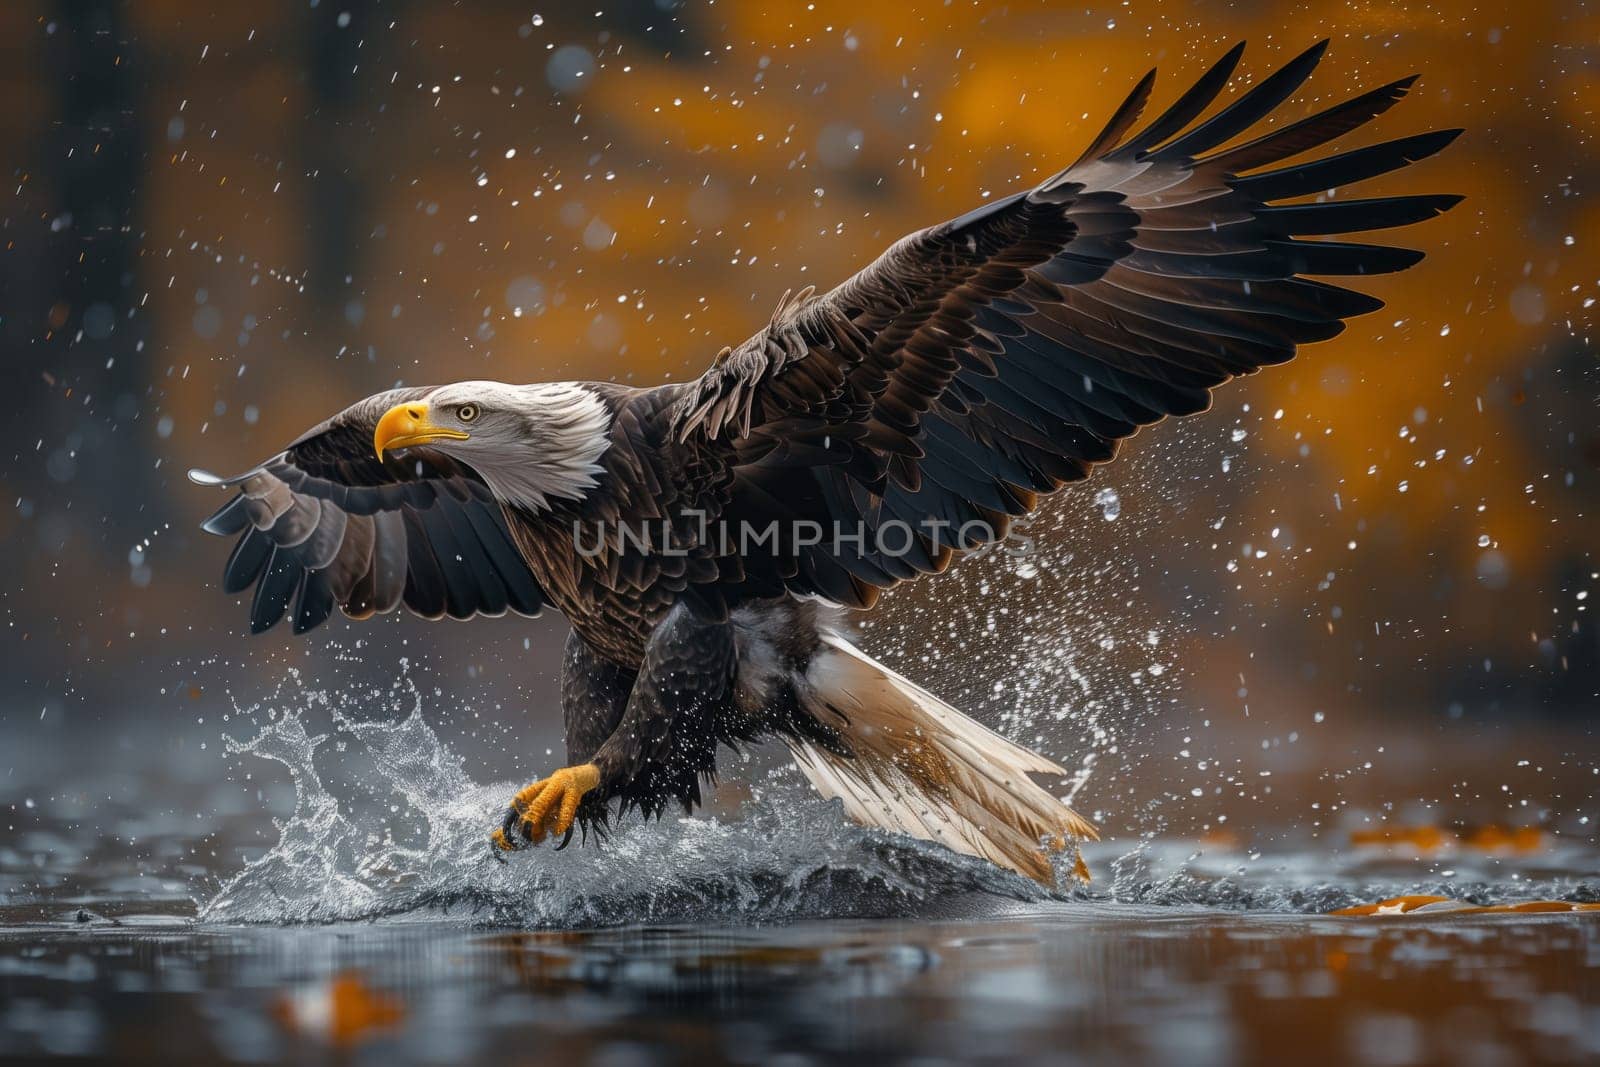 Bald eagle, a sea eagle in Accipitridae family, soars over the water by richwolf